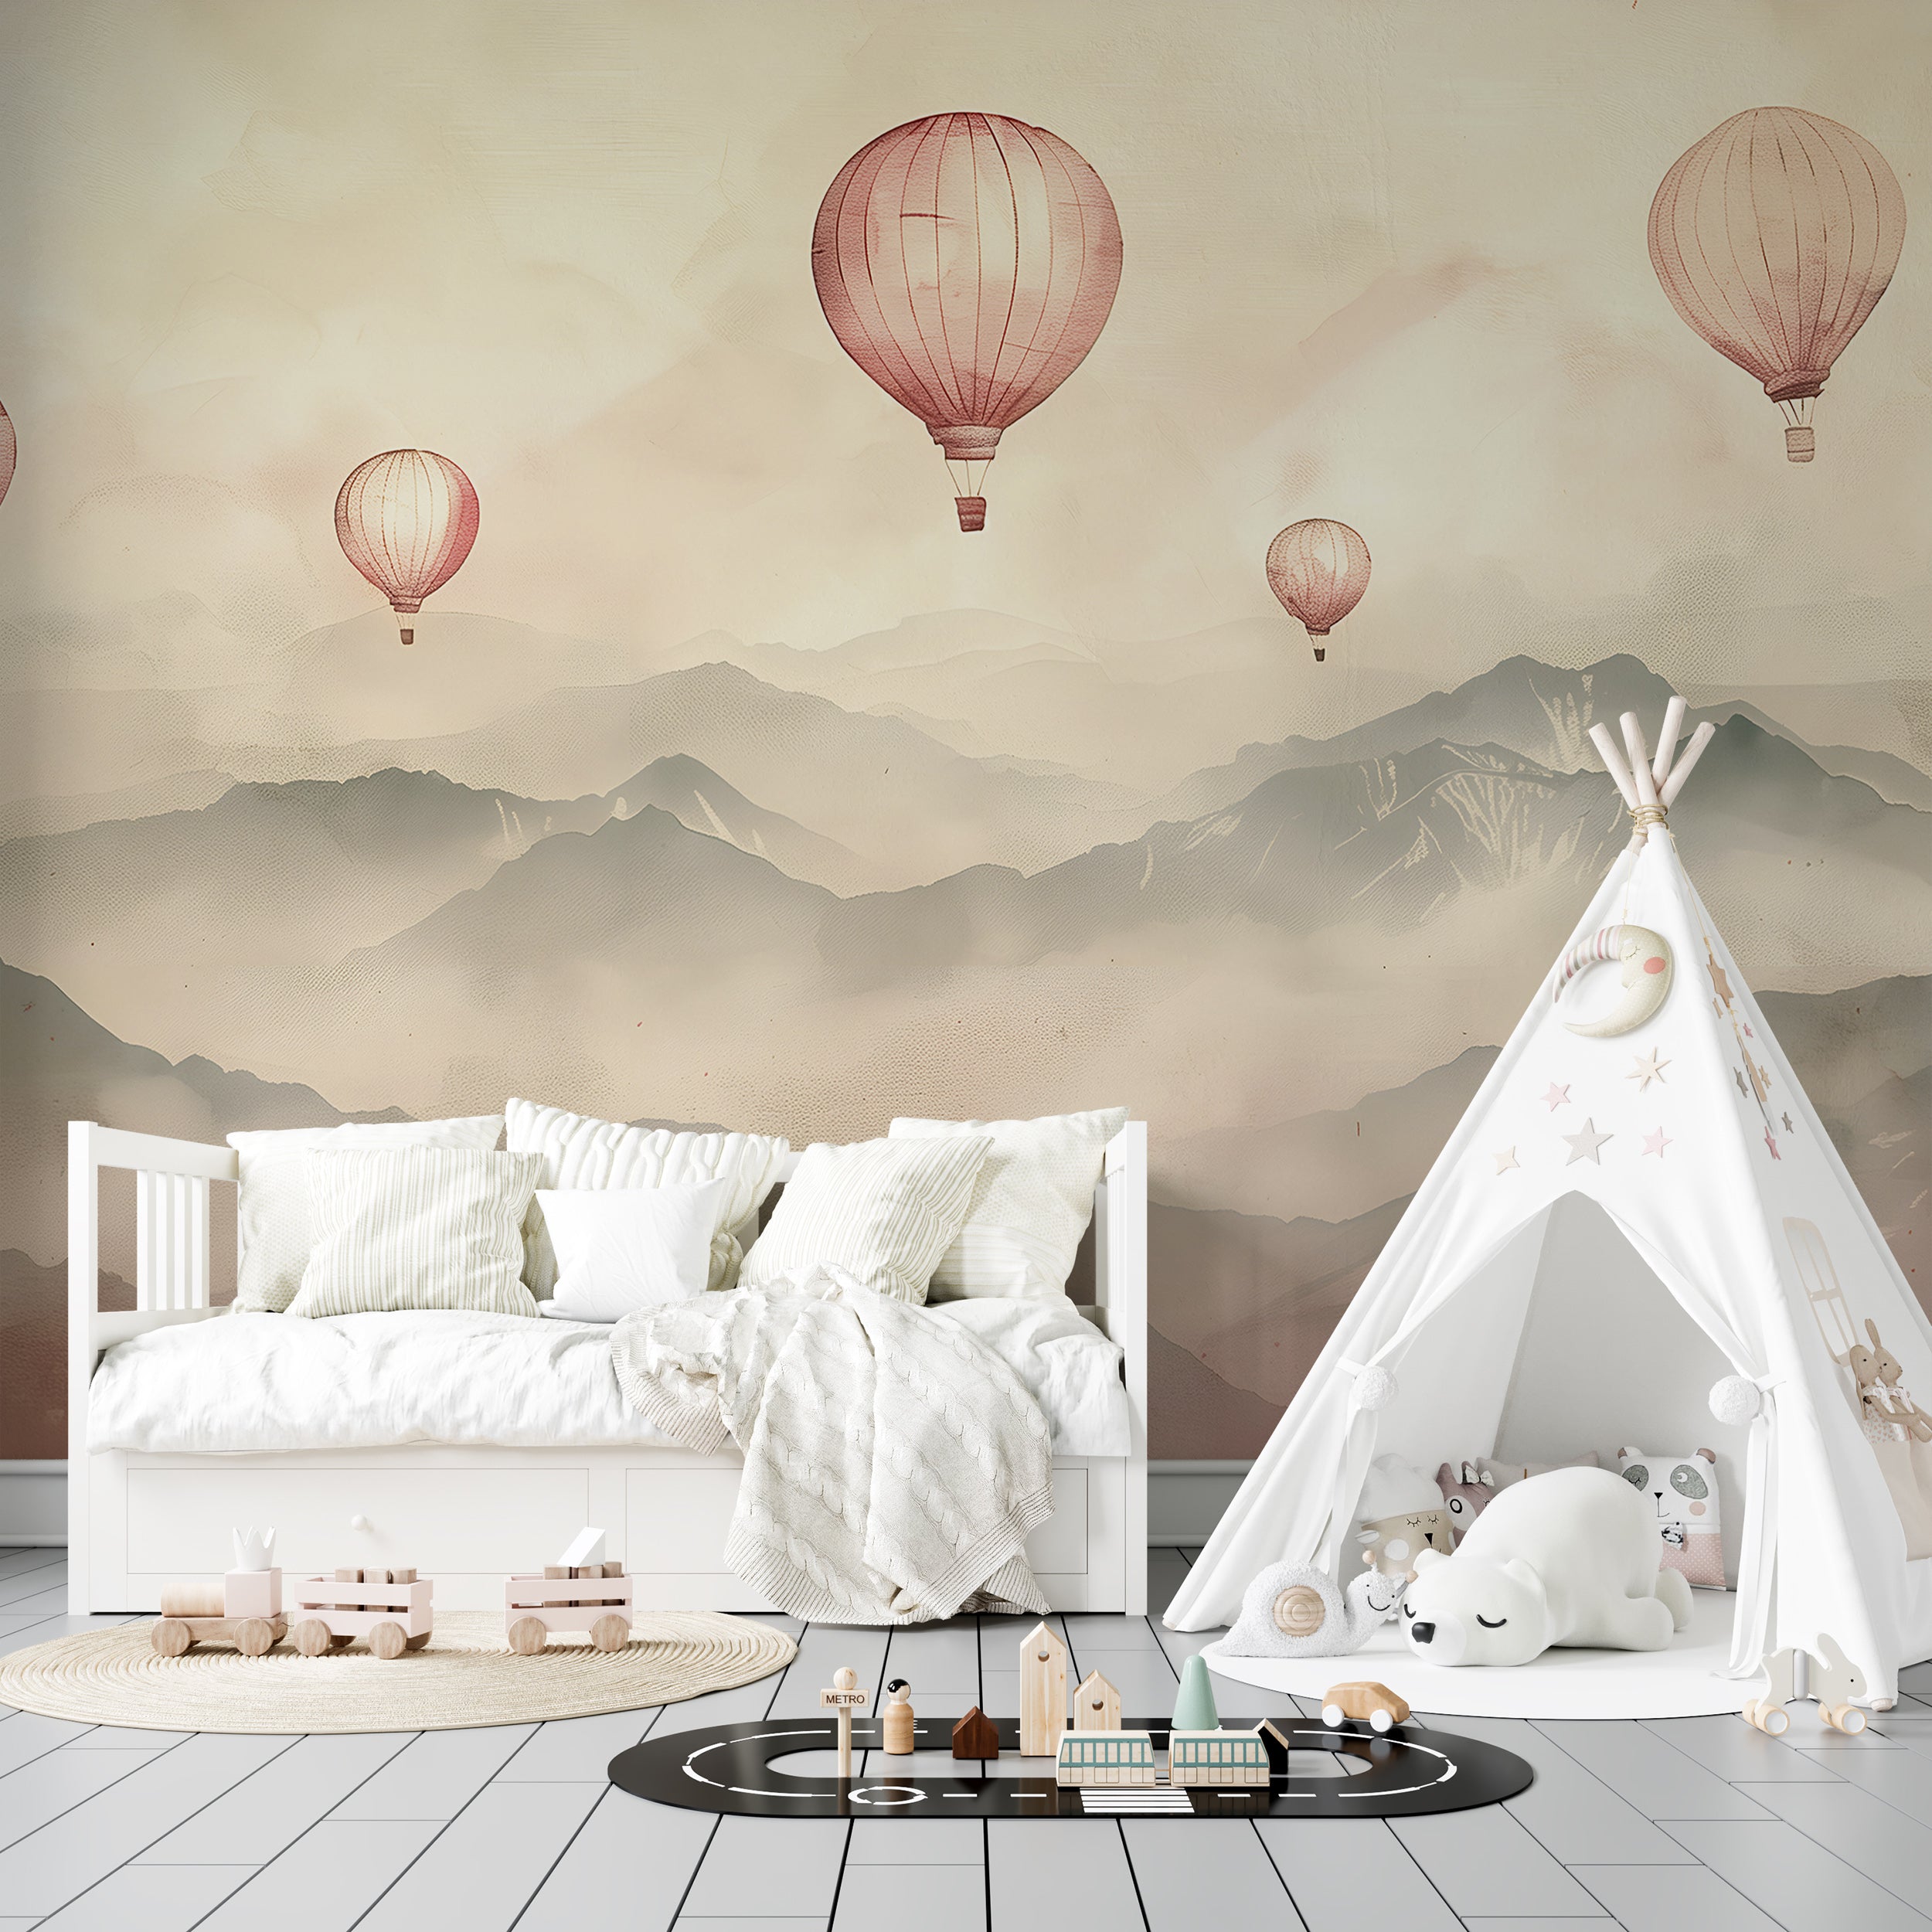 Soft Pink Hot Air Balloons Mural, Watercolor Mountain Landscape Wallpaper, Hot Air Balloons over the Mountains Mural, Peel and Stick Nursery